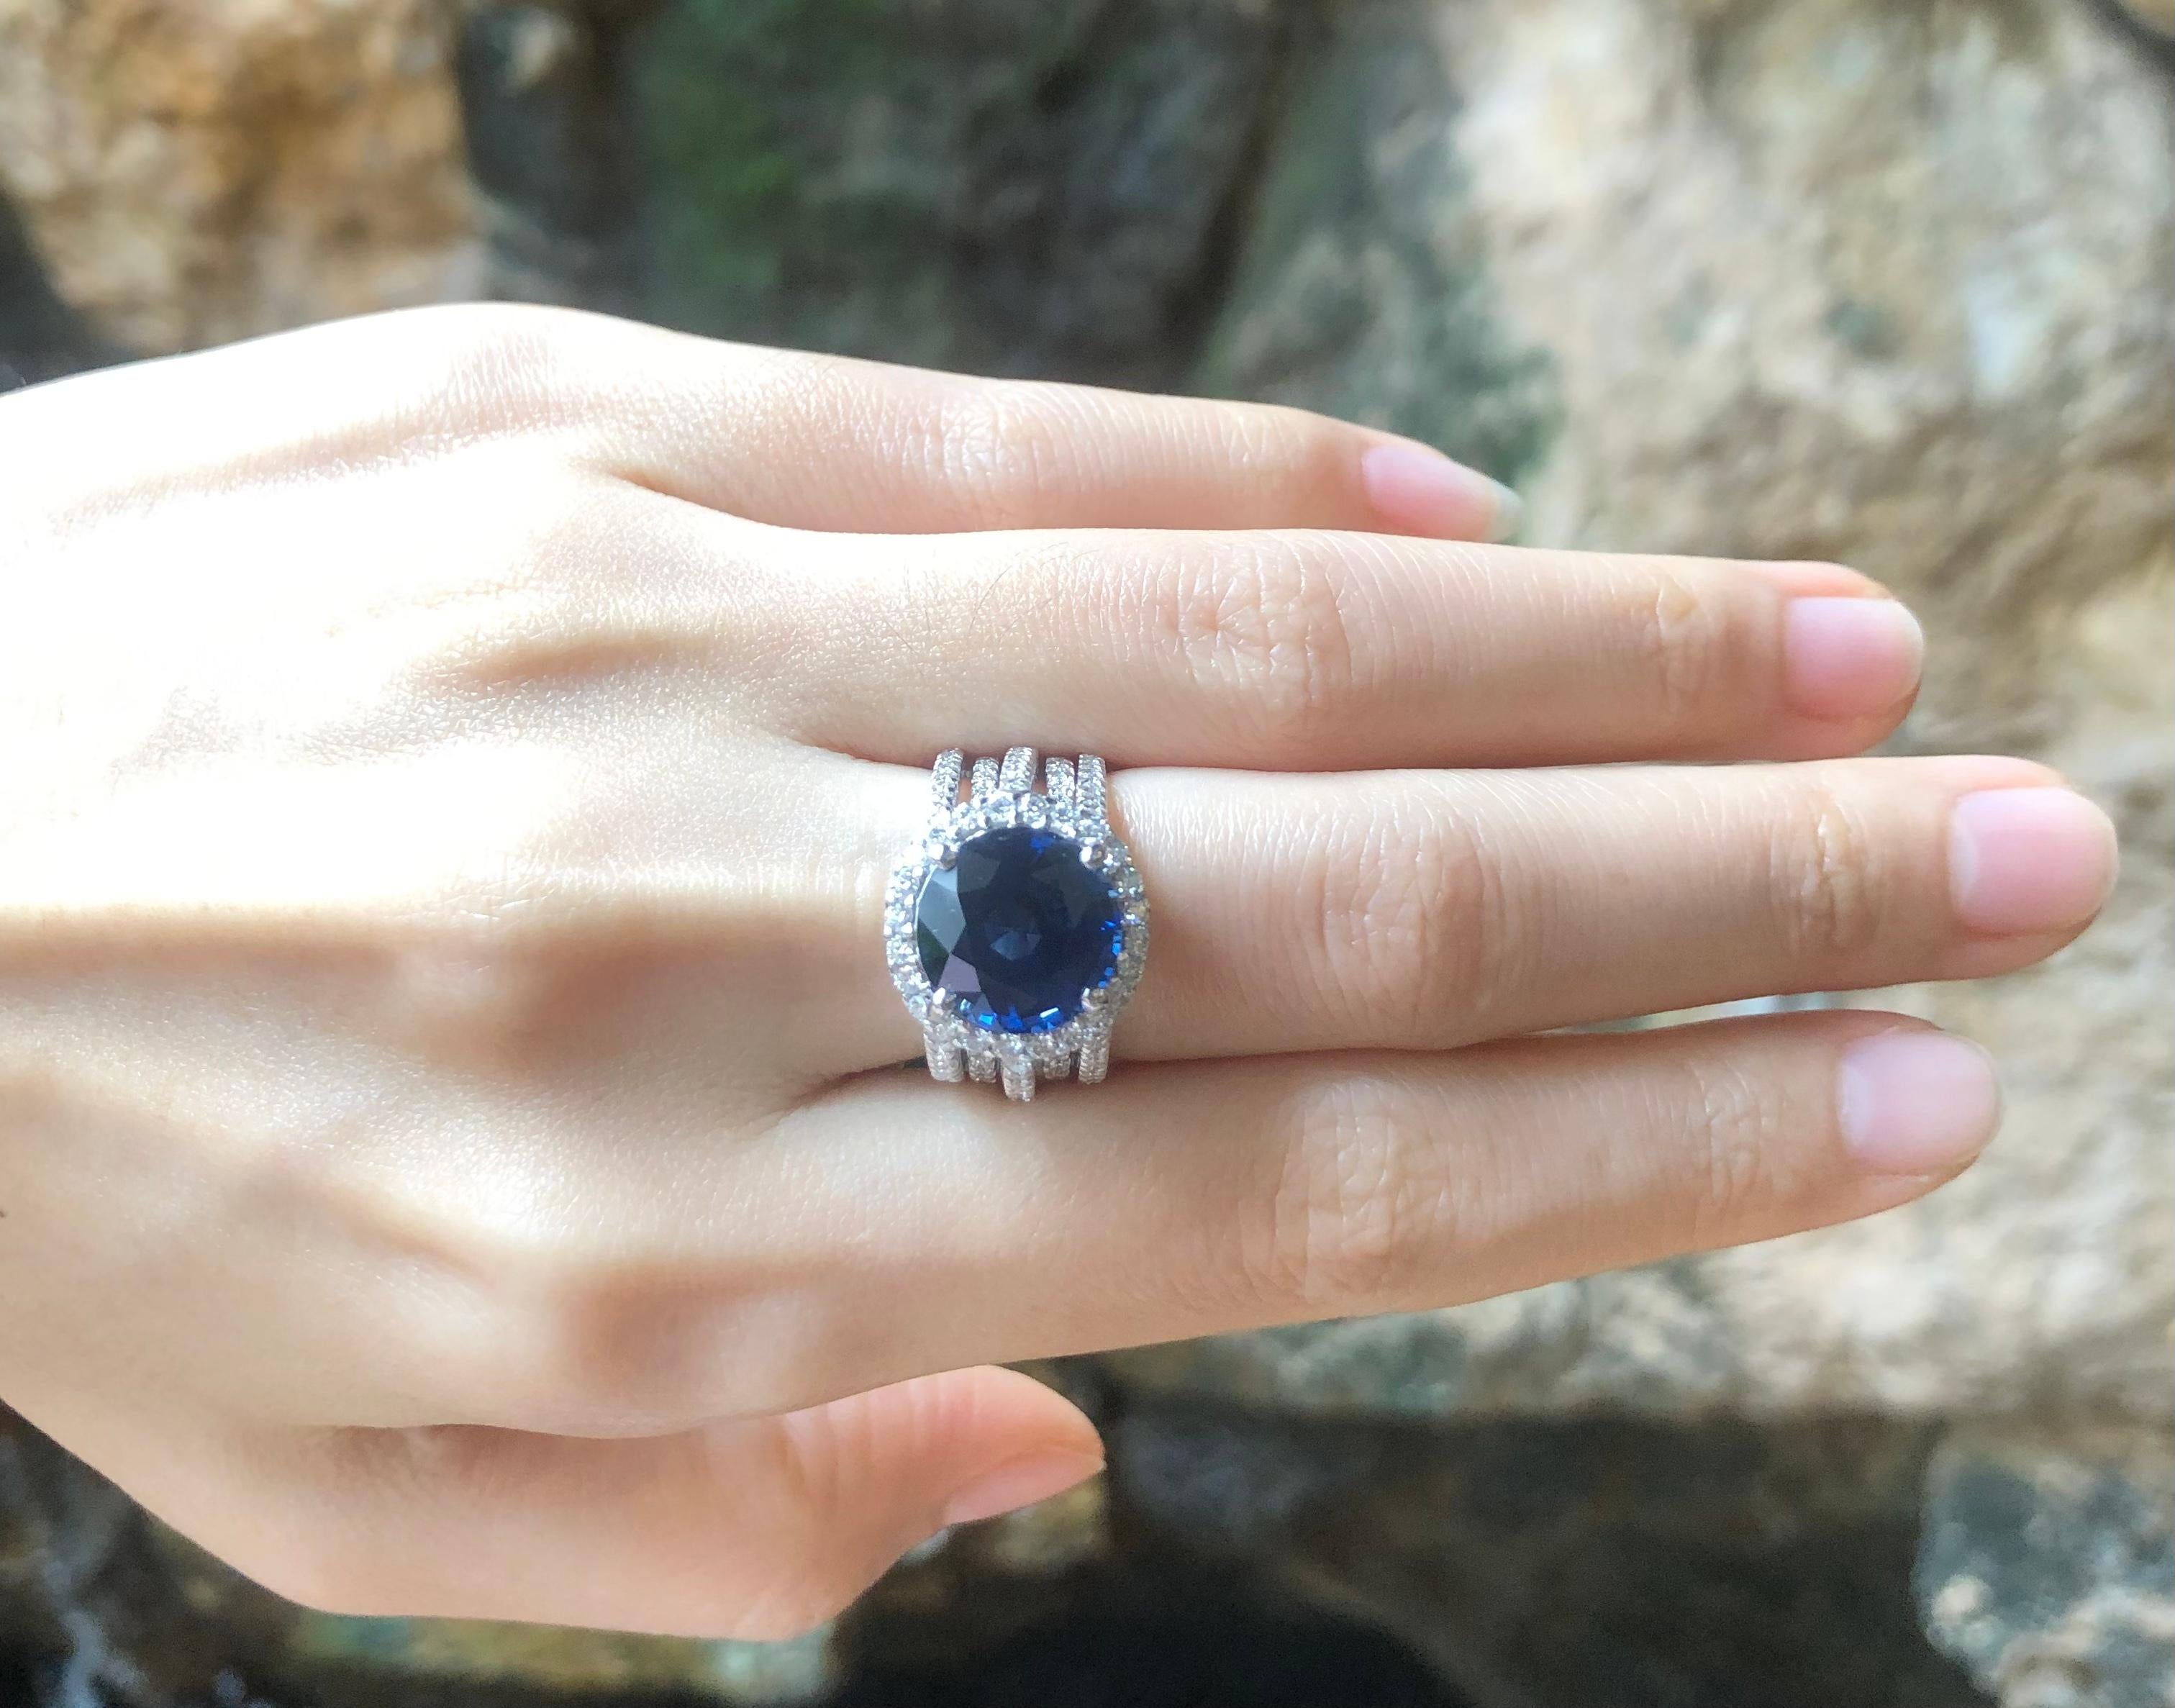 Blue Sapphire 6.29 carats with Diamond 1.66 carats Ring set in 18 Karat White Gold Settings
(GIA Certified) 

Width:  1.4 cm 
Length: 1.4 cm
Ring Size: 52
Total Weight: 12.04 grams

Blue Sapphire 
Width:  1.2 cm 
Length: 1.2 cm


